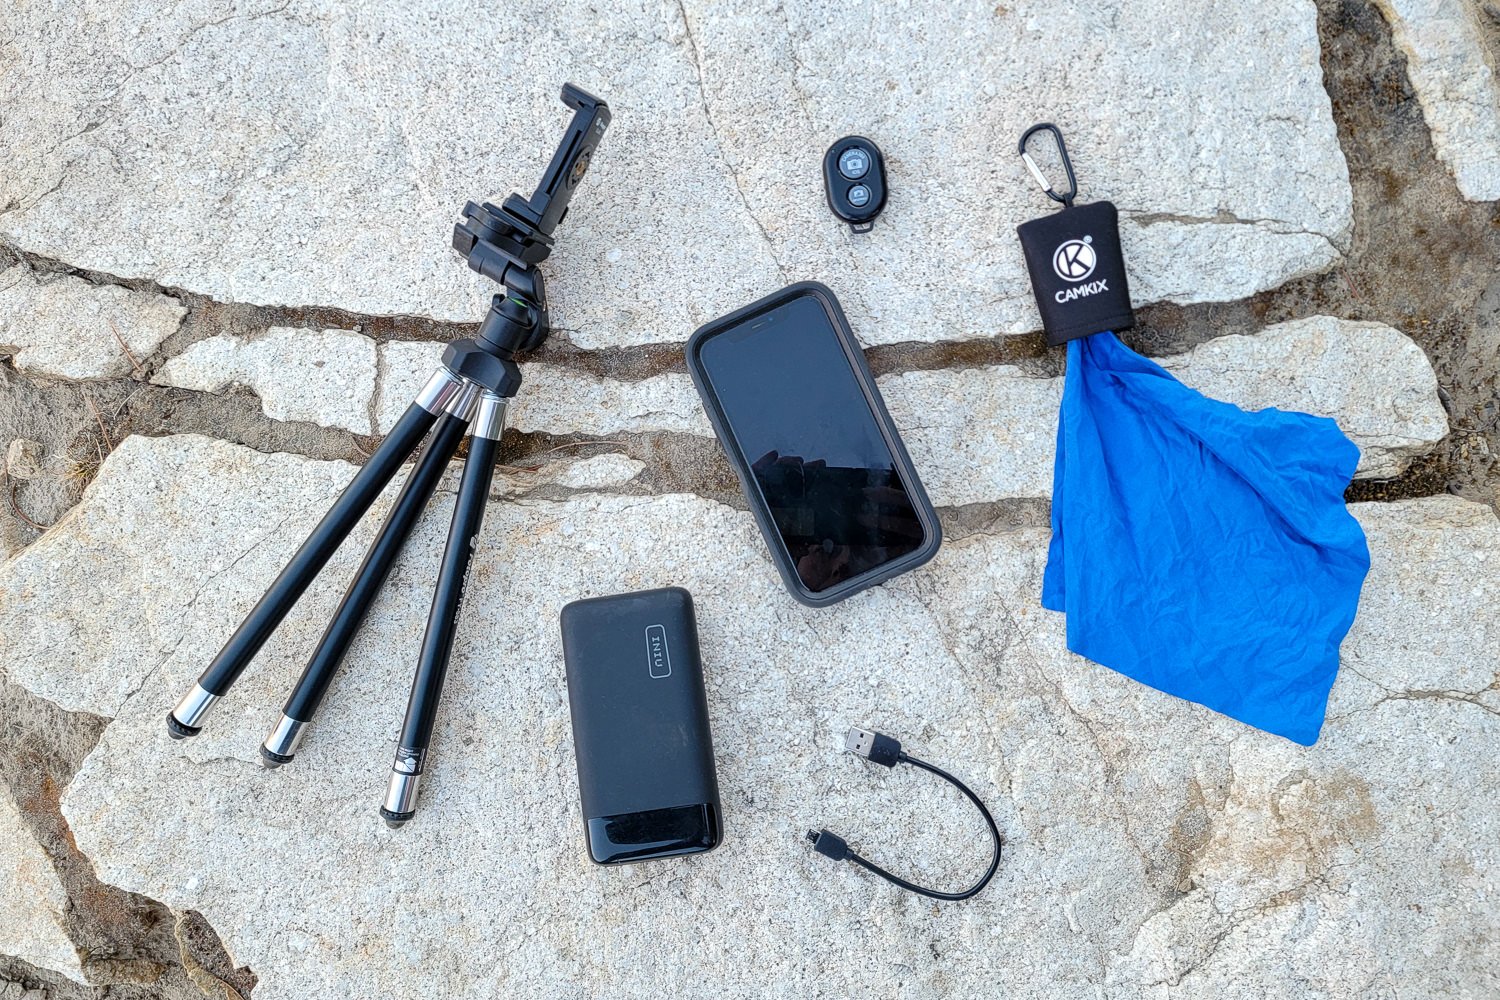 Top-down view of photography gear for backpacking